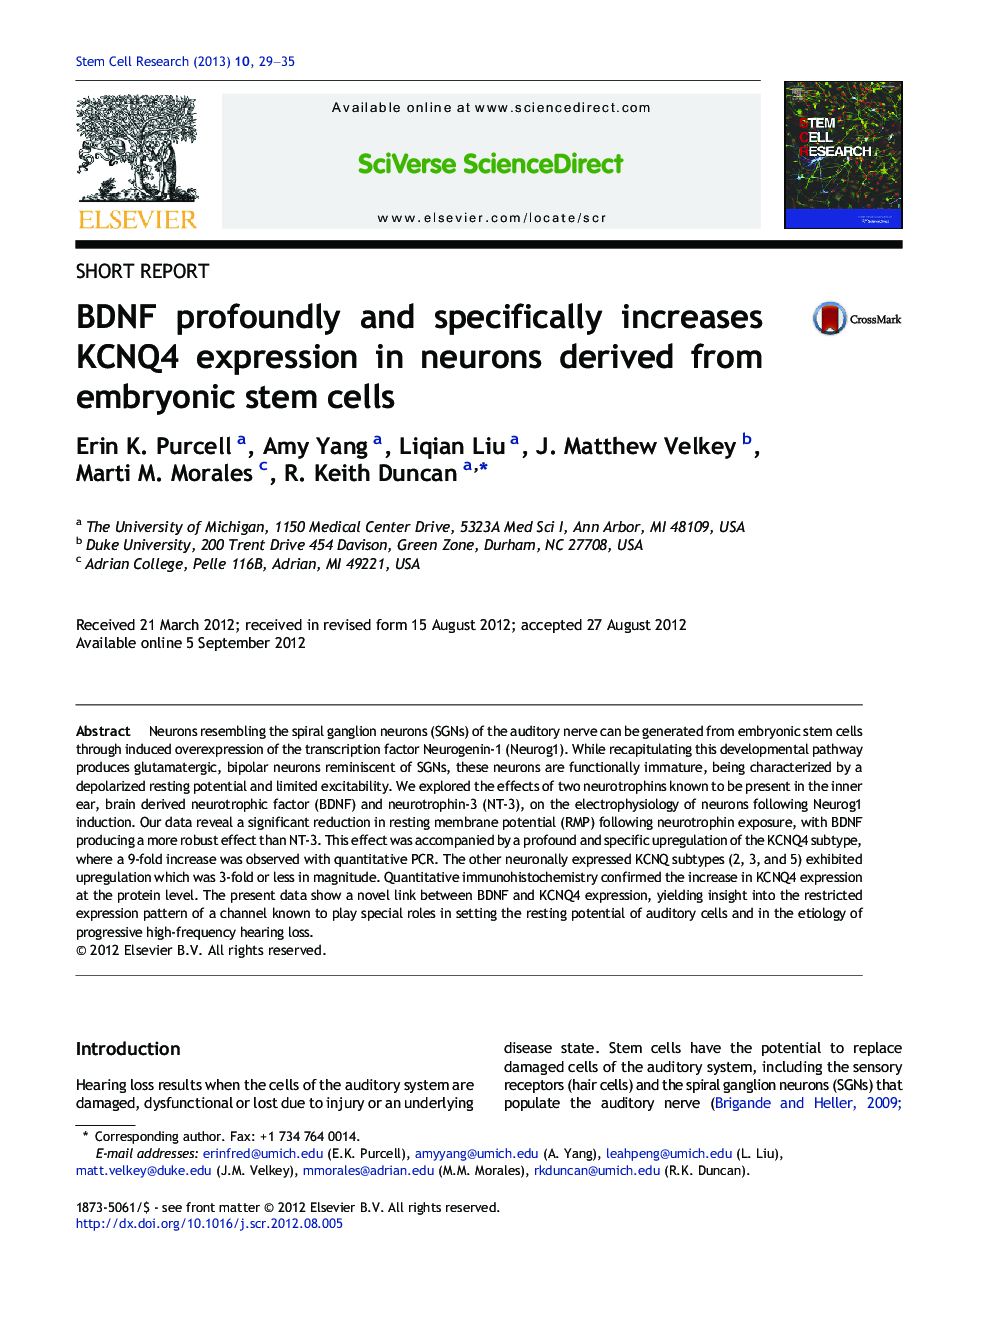 BDNF profoundly and specifically increases KCNQ4 expression in neurons derived from embryonic stem cells